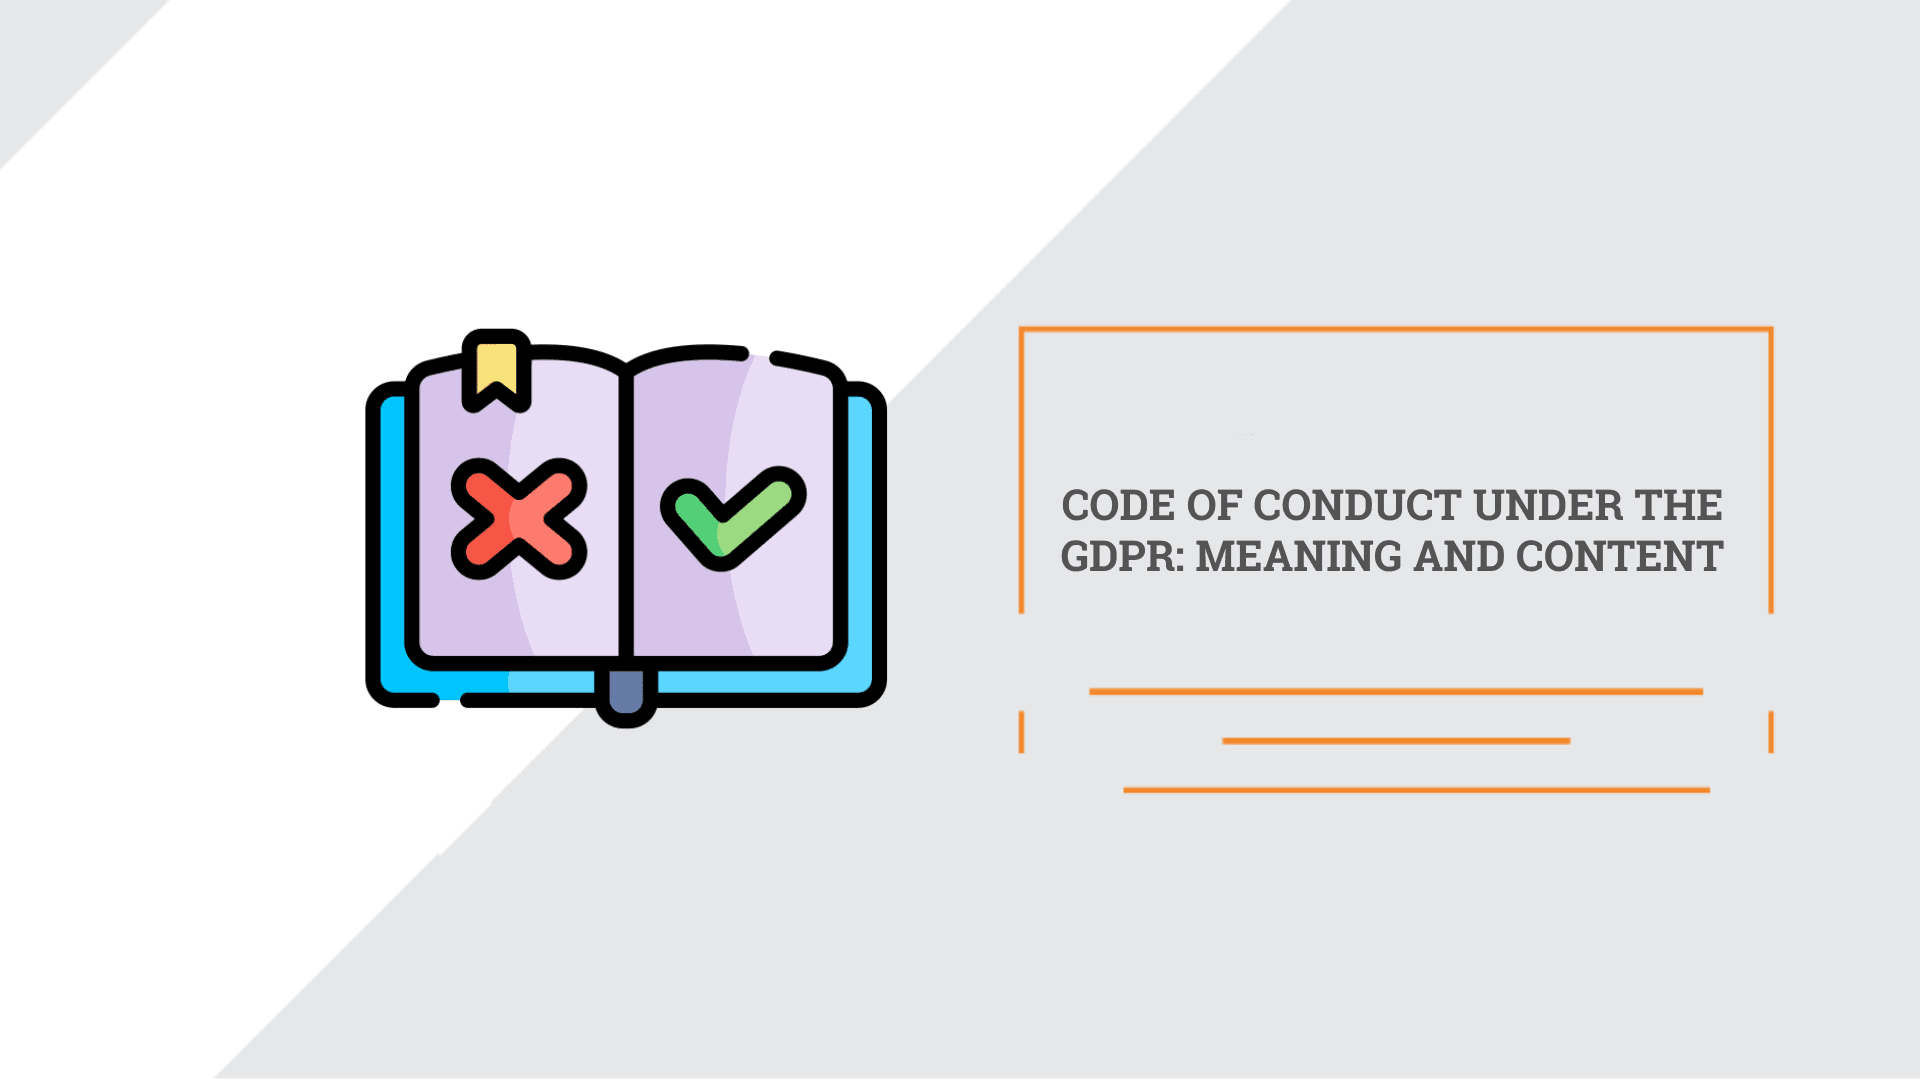 Adopting a code of conduct as a step to GDPR compliance